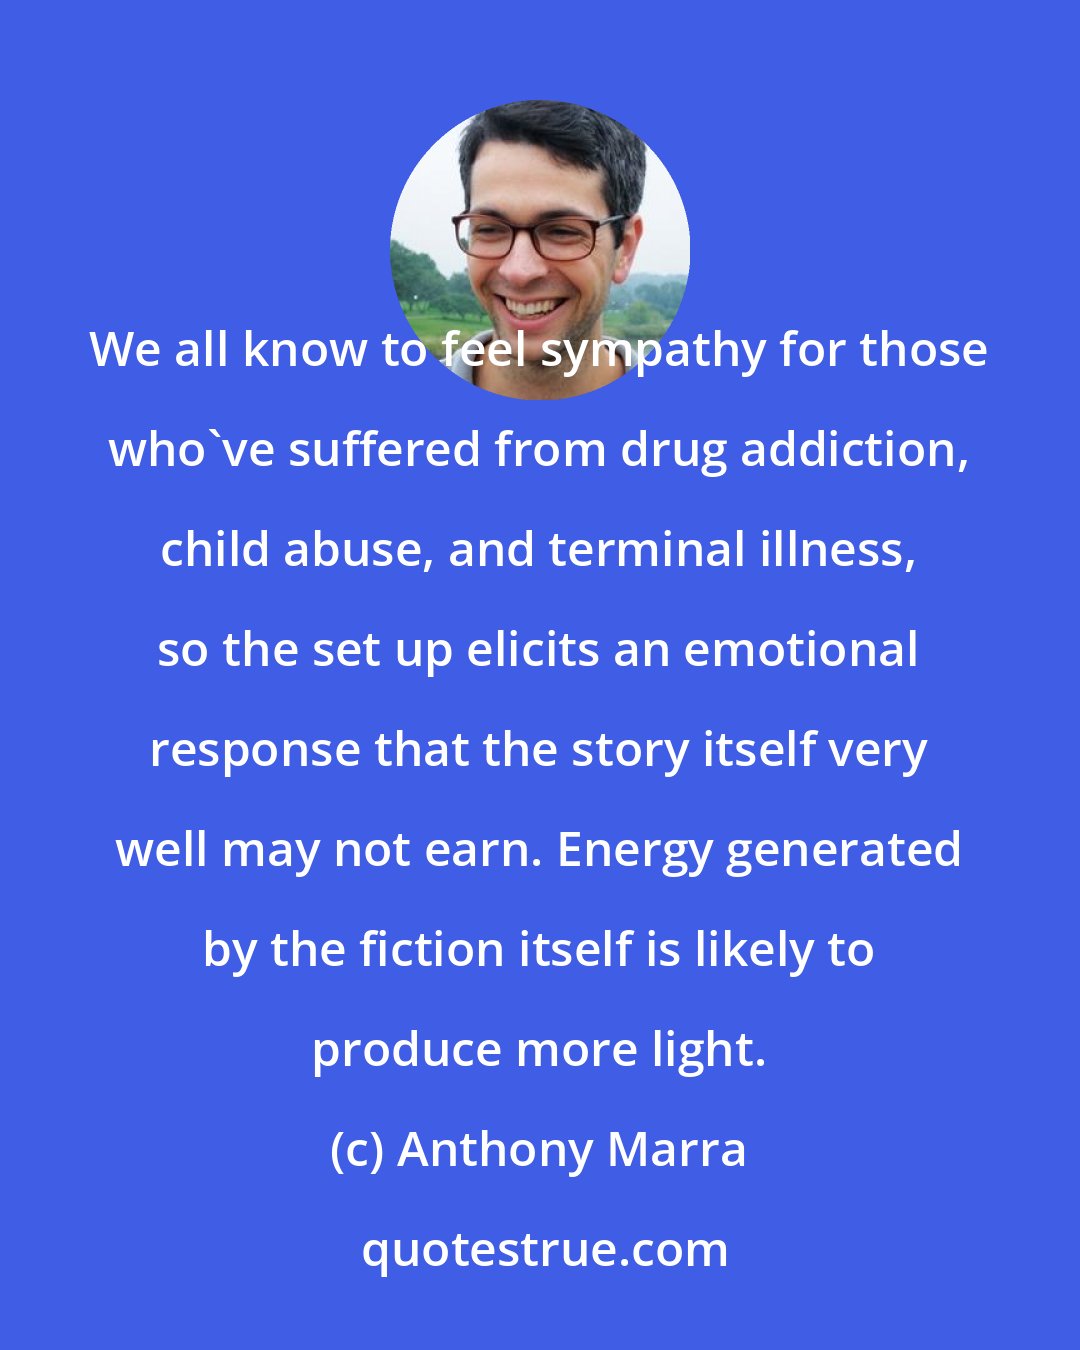 Anthony Marra: We all know to feel sympathy for those who've suffered from drug addiction, child abuse, and terminal illness, so the set up elicits an emotional response that the story itself very well may not earn. Energy generated by the fiction itself is likely to produce more light.